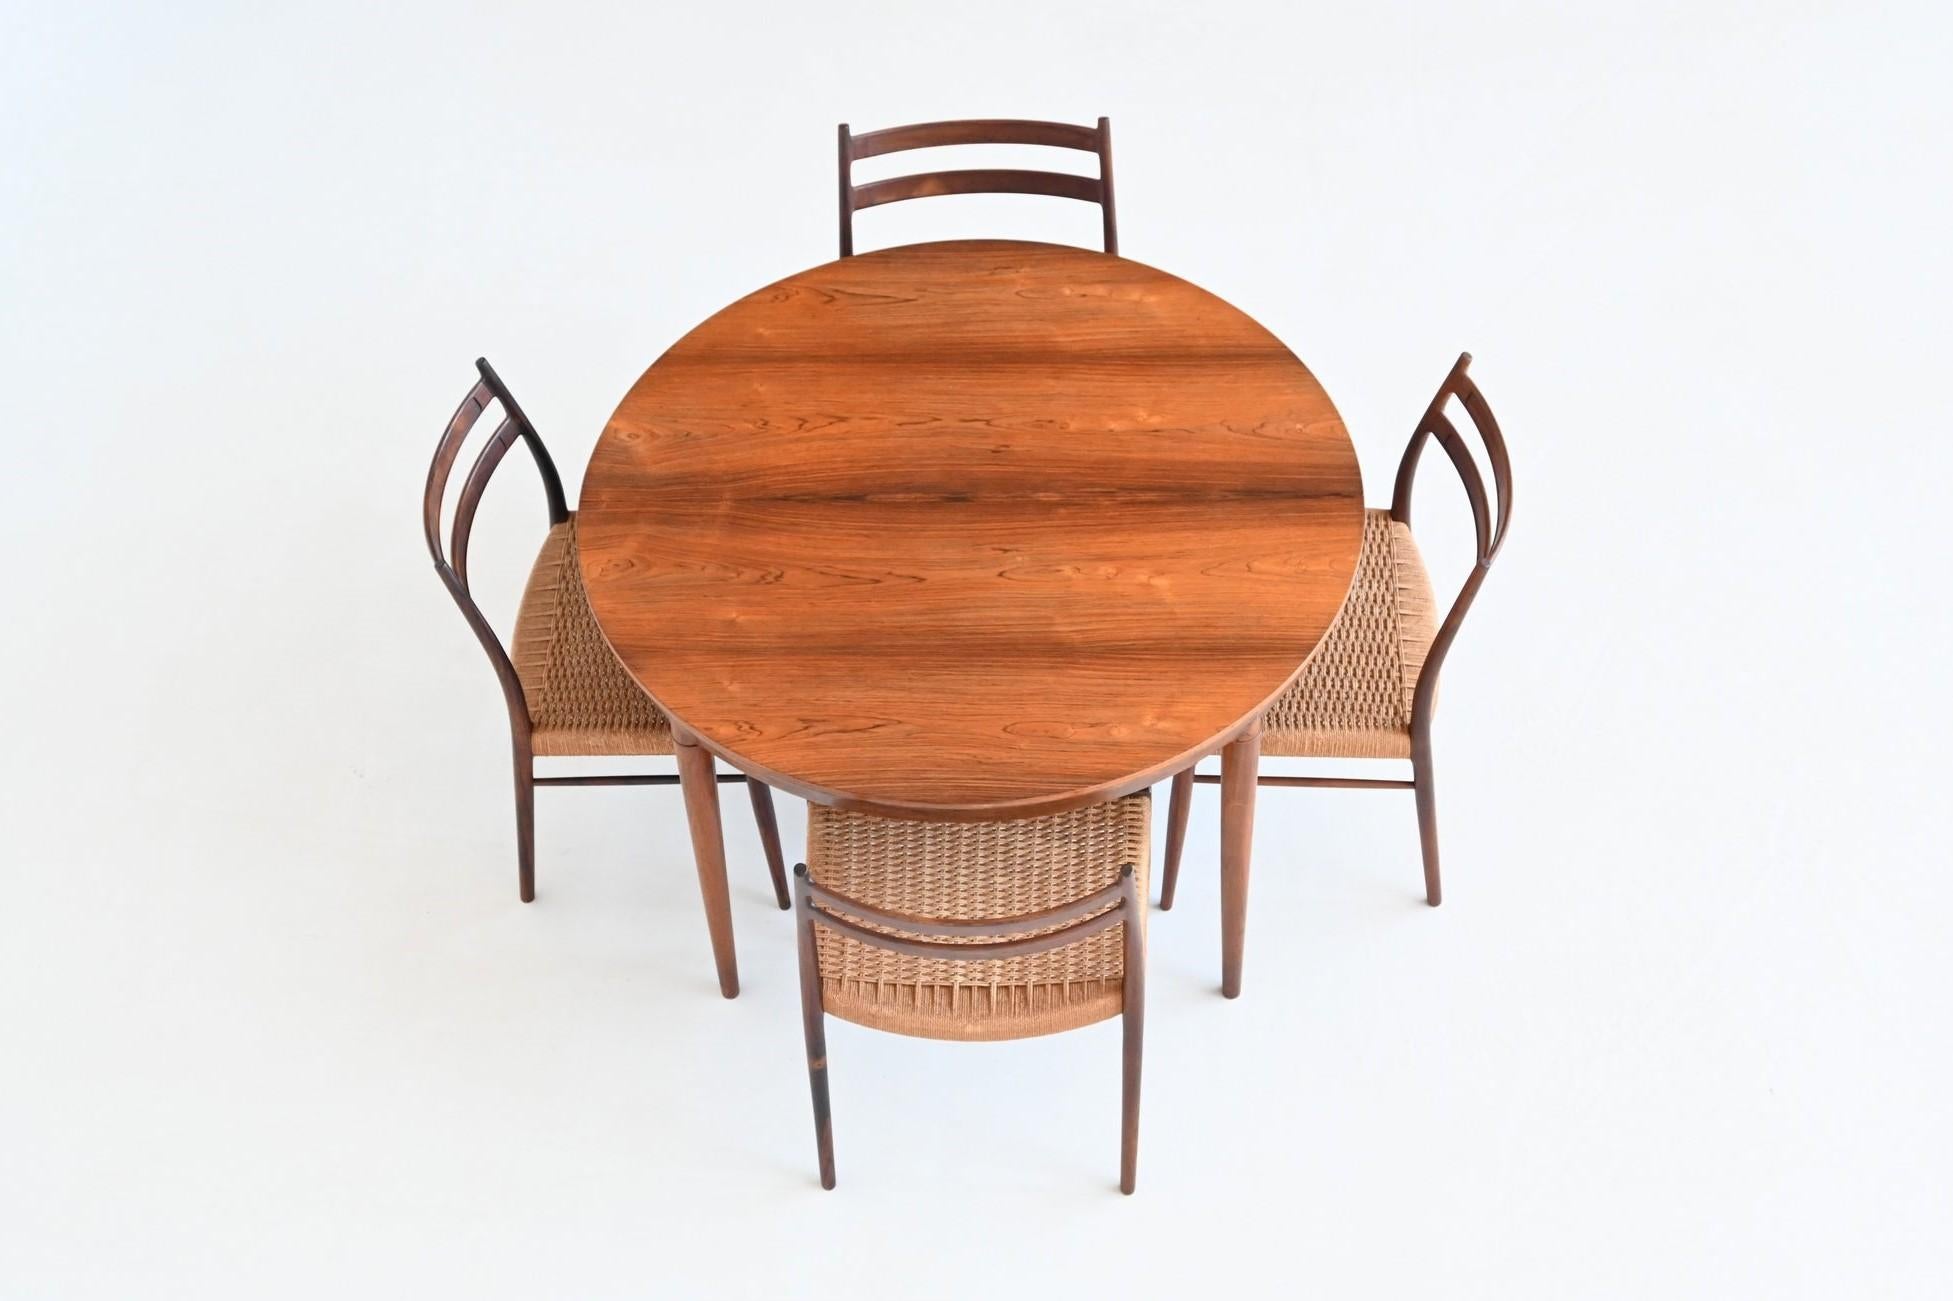 Stunning extendable dining table model 71 designed by Severin Hansen for Haslev Møbelsnedkeri and manufactured by Bovenkamp, Denmark 1960. This table is 117 cm round and is extendable up to a length of 217 cm by using two extension leaves. This